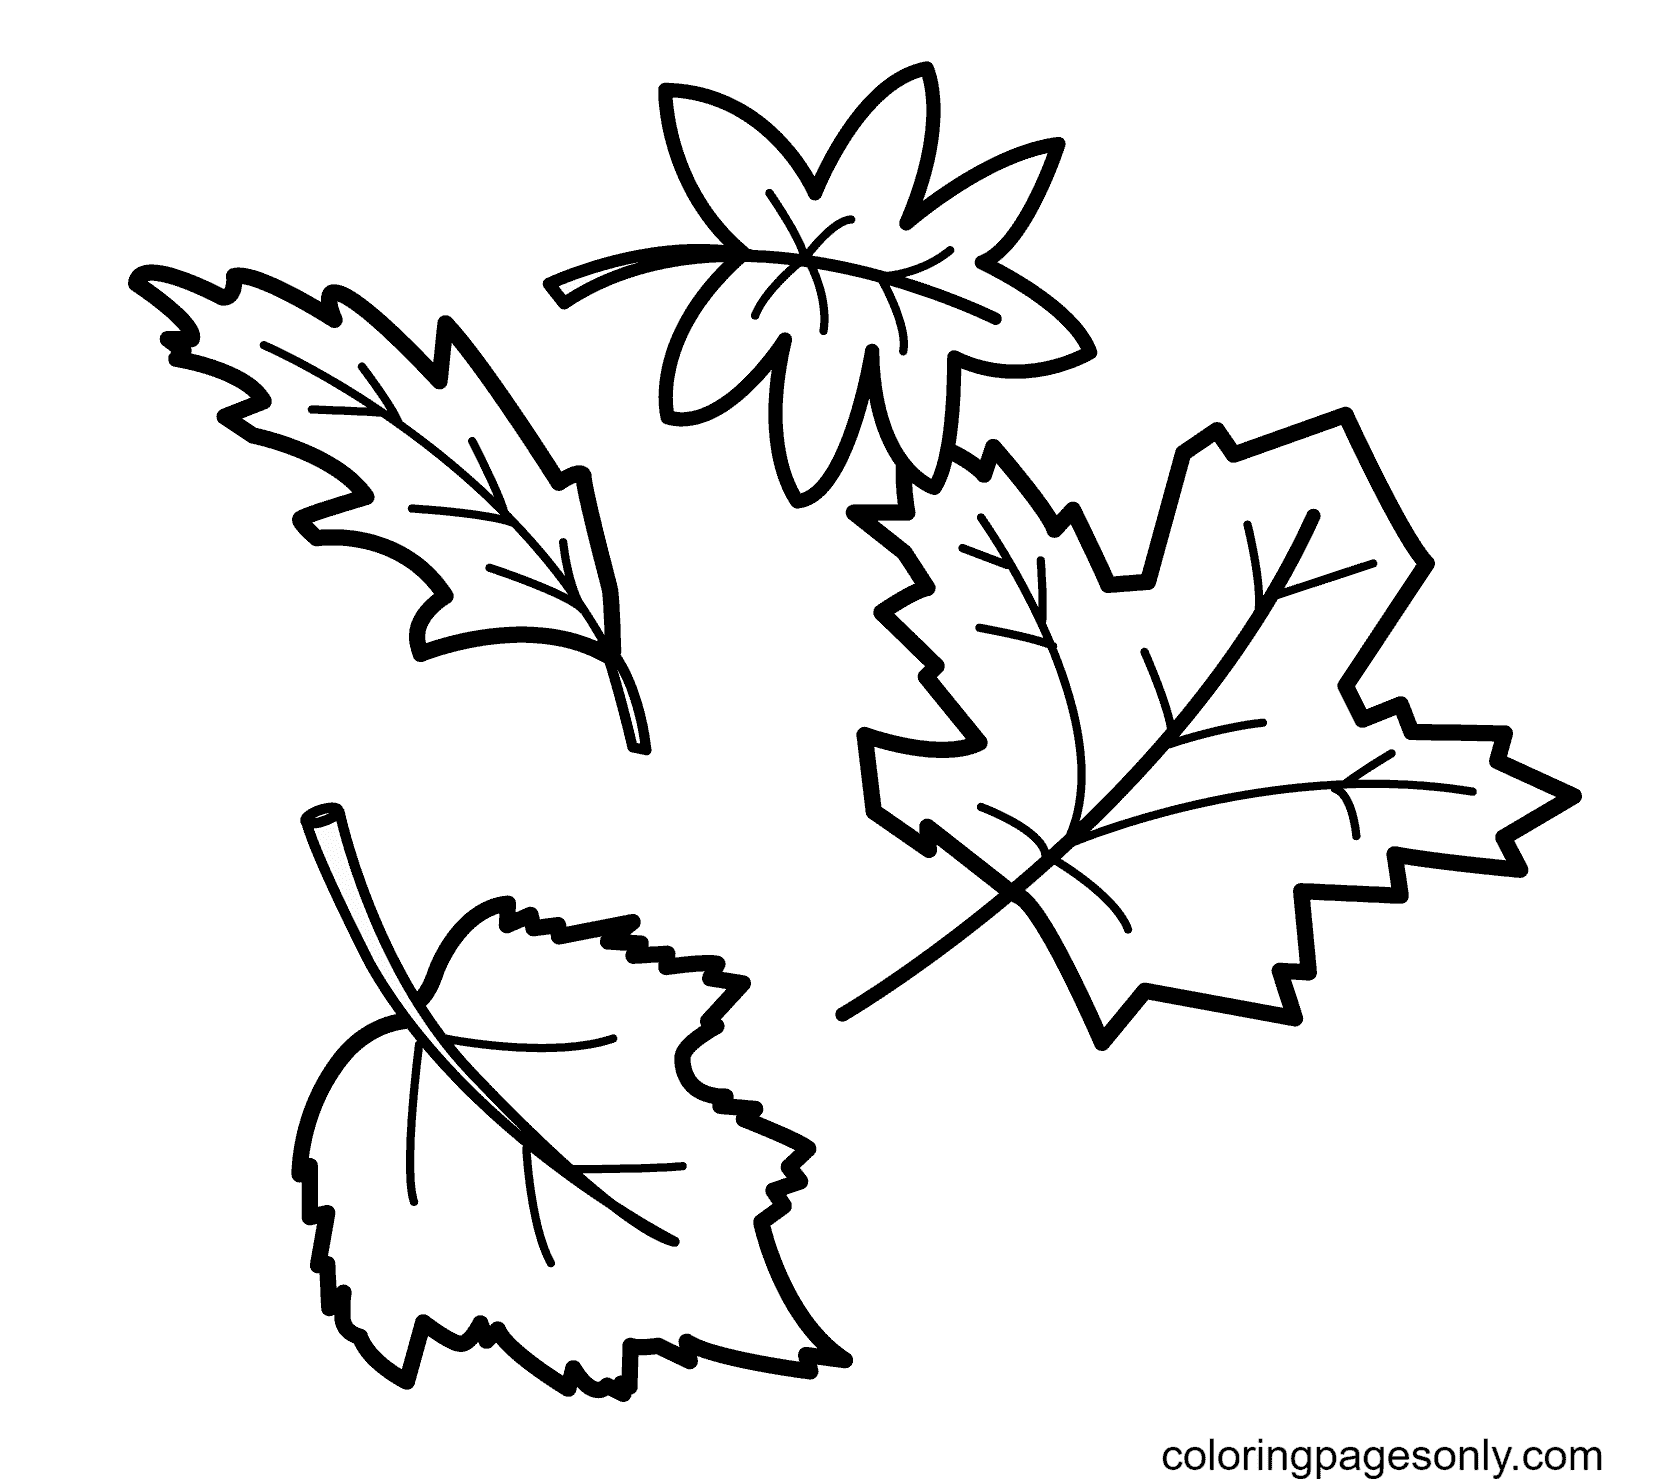 printable-autumn-leaves-coloring-page-free-printable-coloring-pages